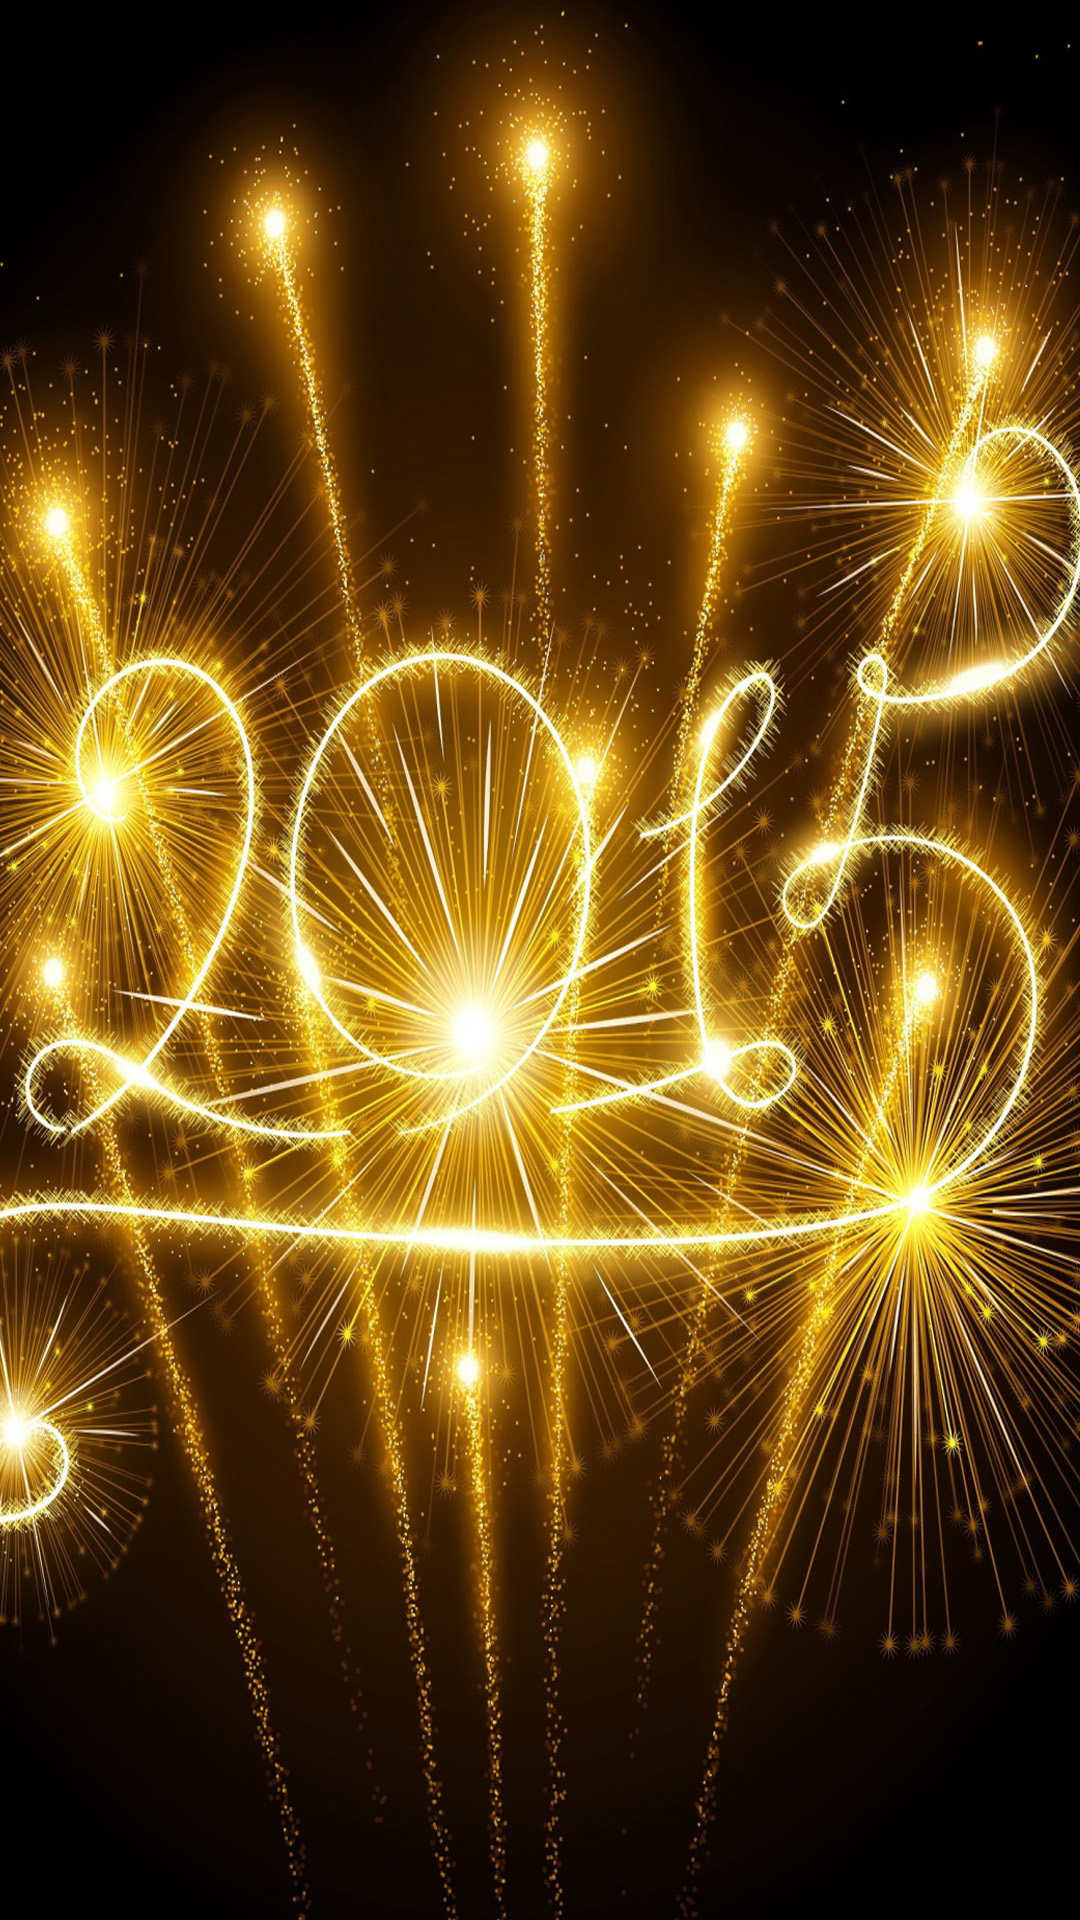 Happy new year 2015 wallpapers for iPhone and iPad